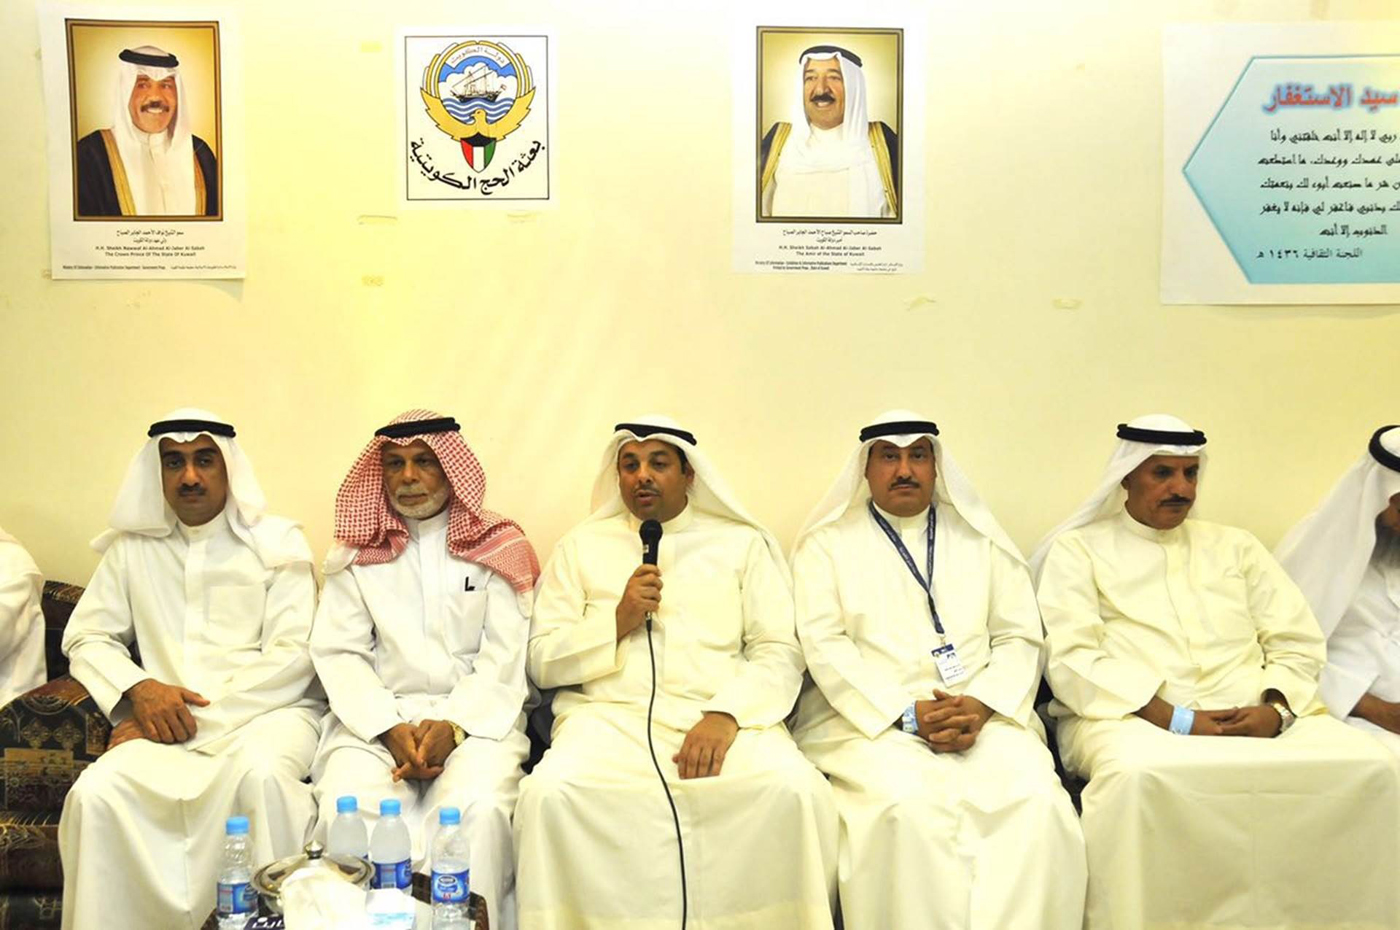 Reception ceremony organized by Kuwaiti Hajj missions in the holy city of Makkah